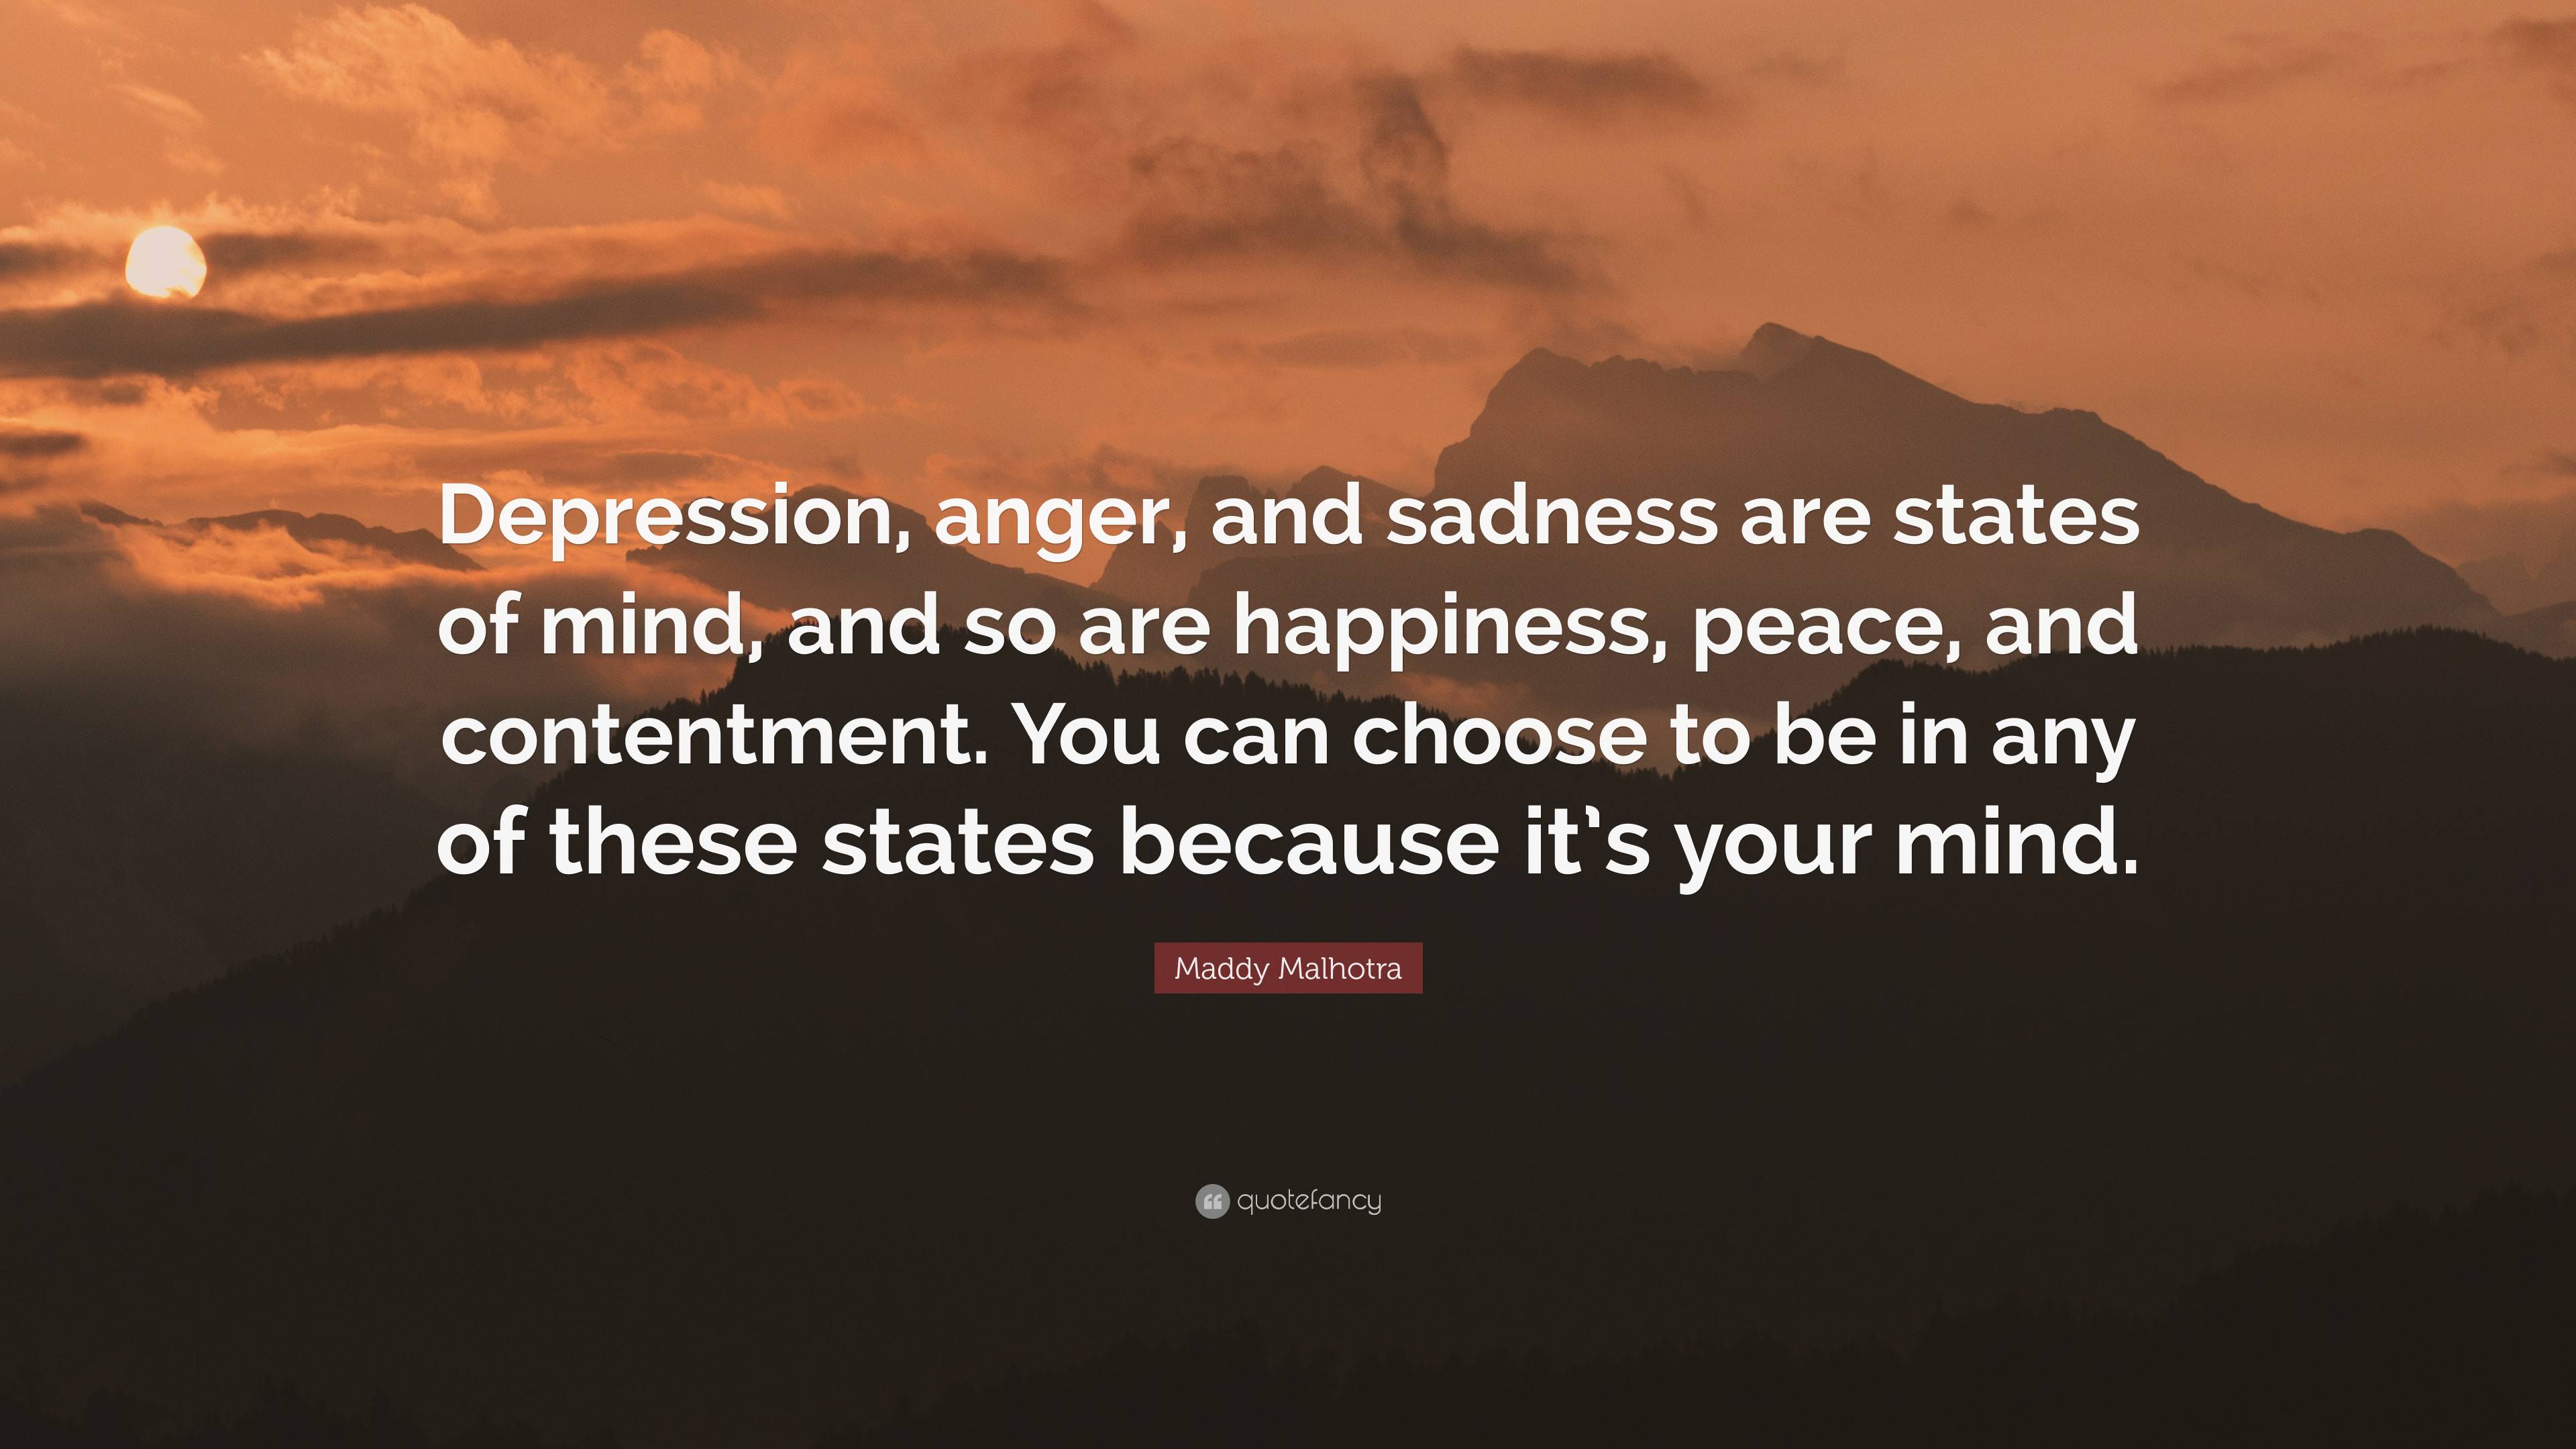 Maddy Malhotra Quote: “Depression, anger, and sadness are states of ...